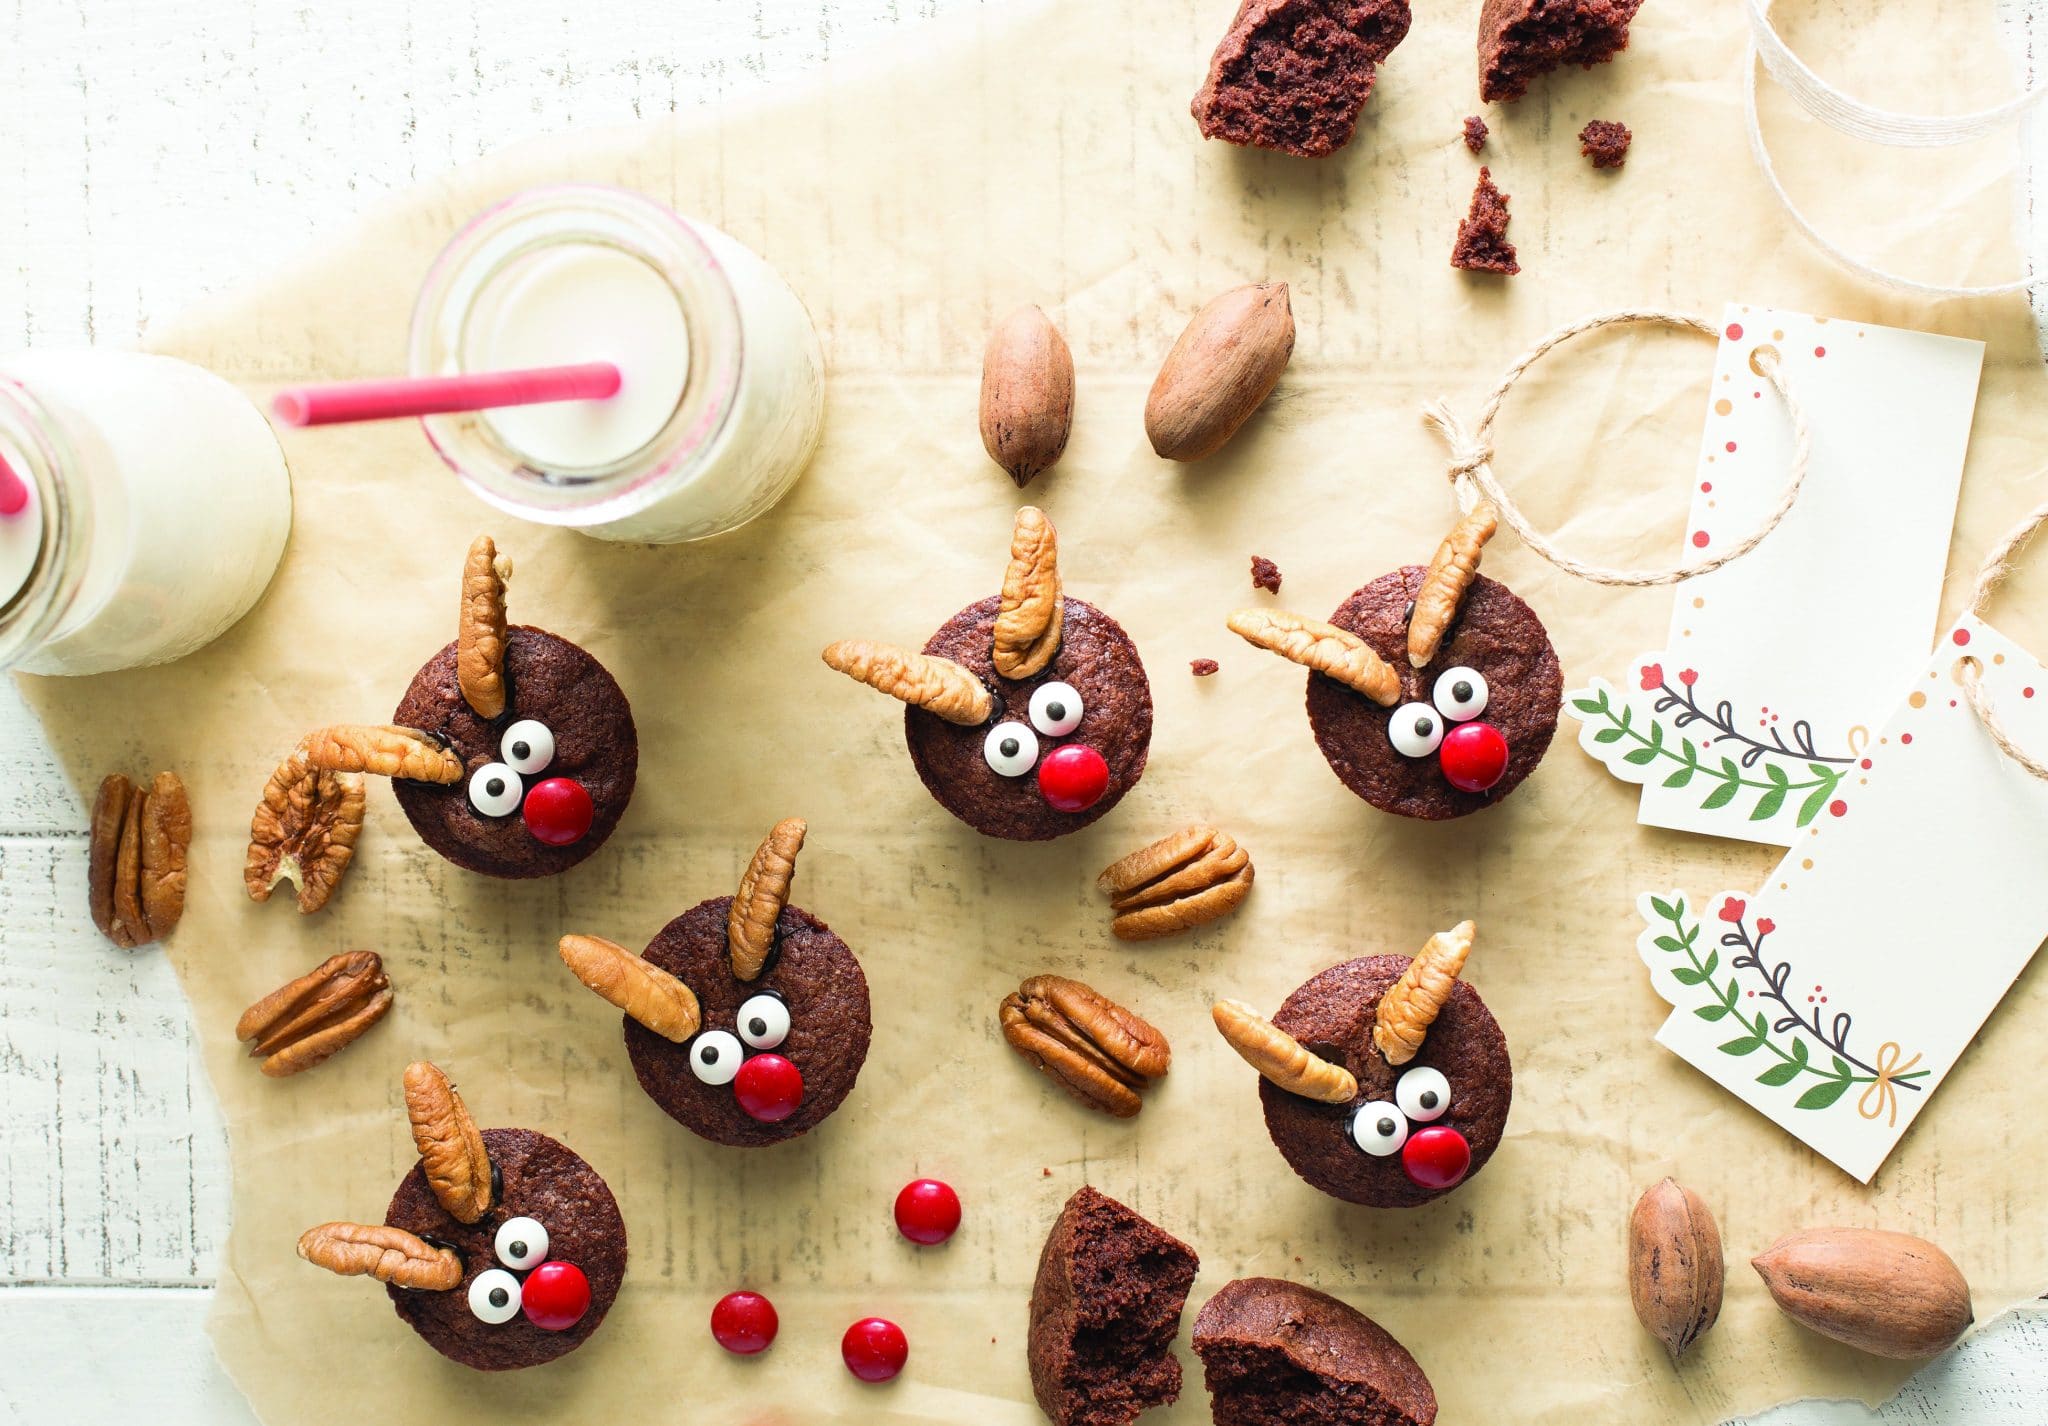 Need some quick holiday snack ideas?